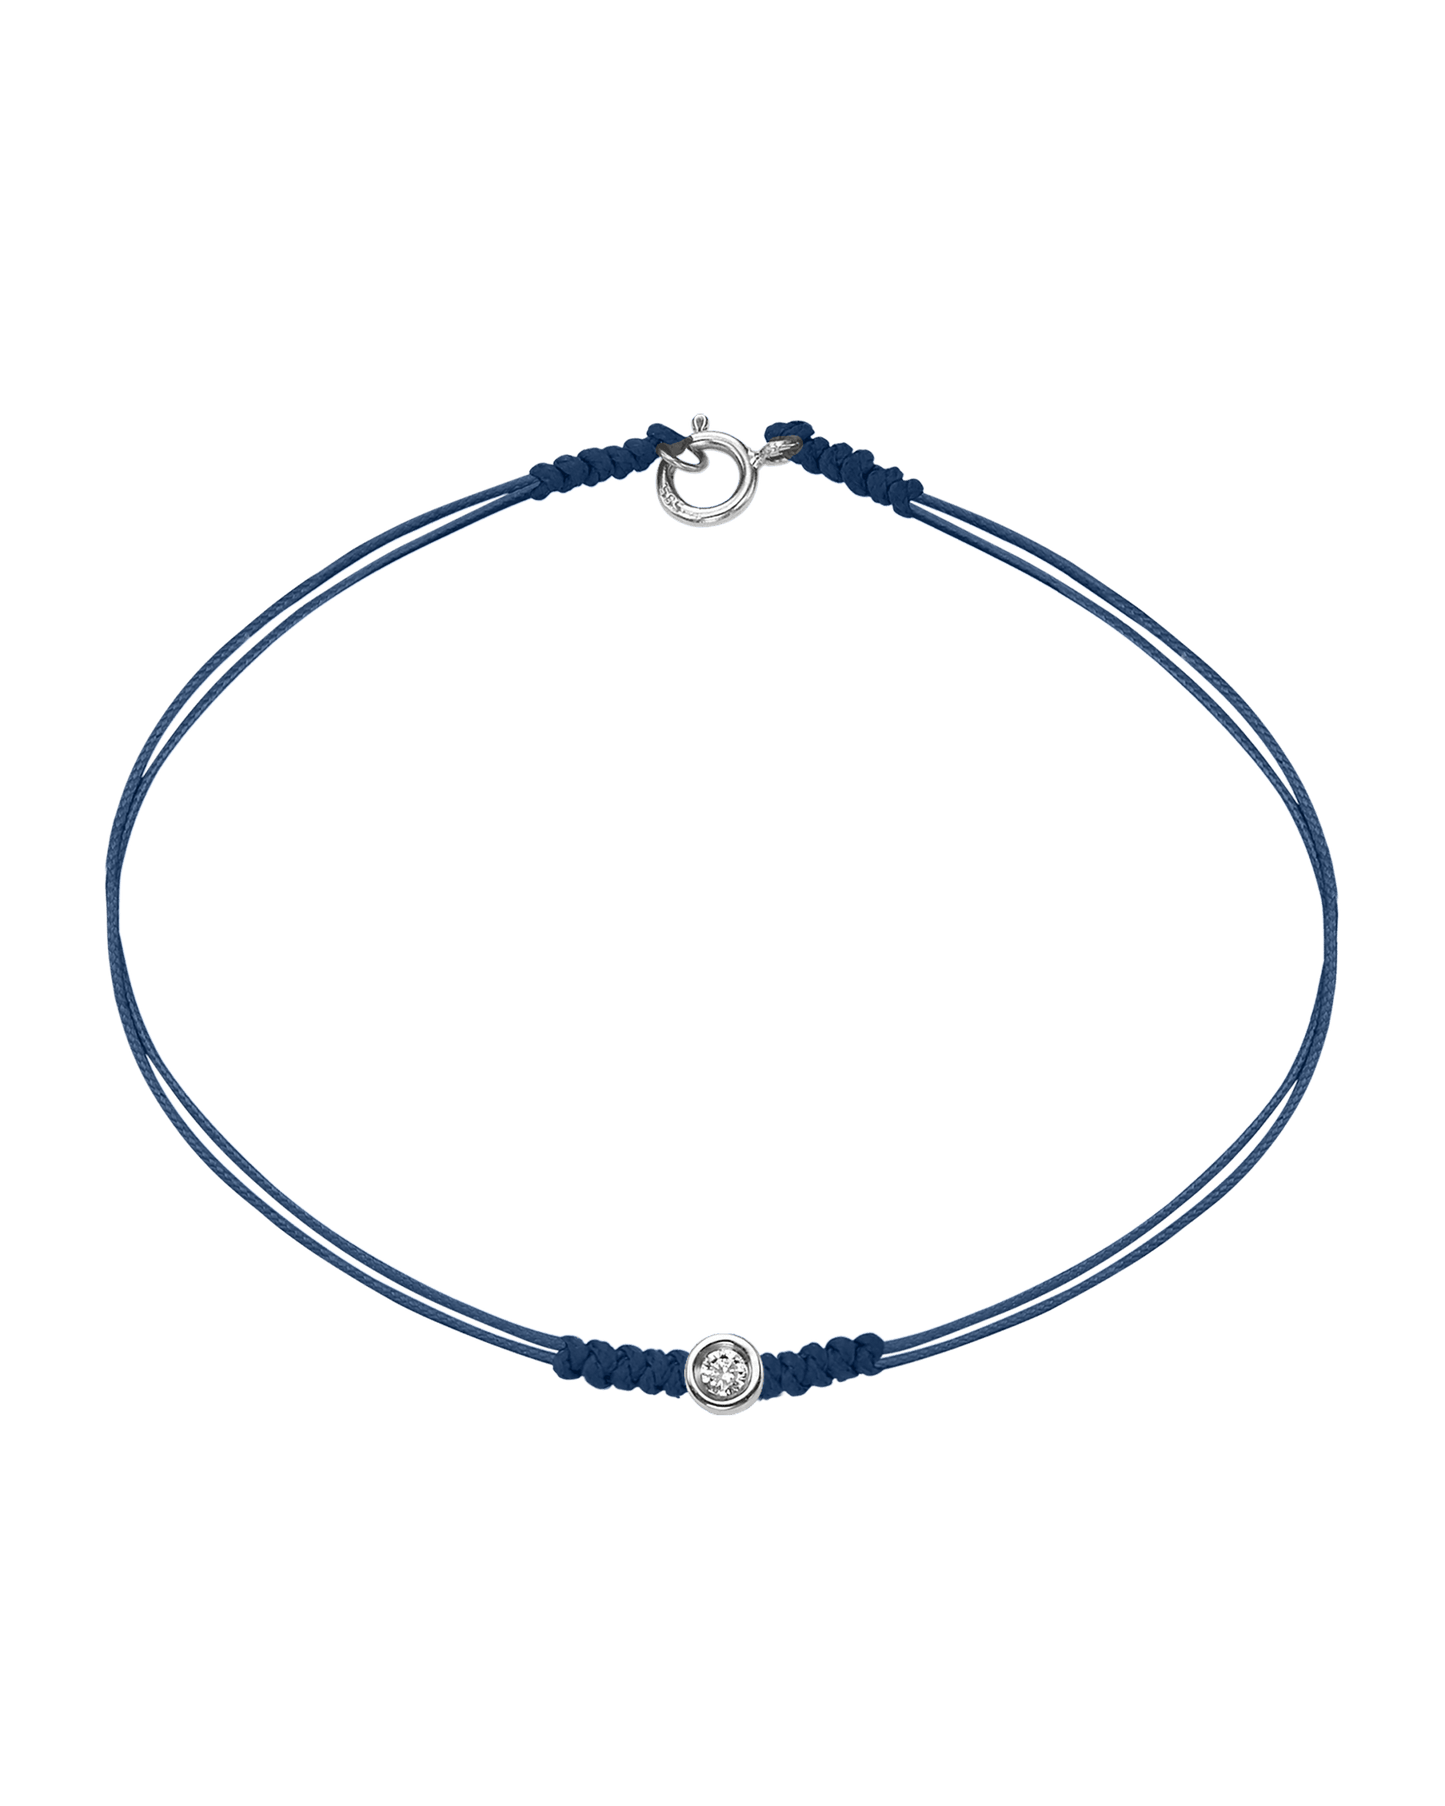 The Classic String of Love with clasp - 14K White Gold Bracelets 14K Solid Gold Indigo Small: 0.03ct Small - 6 Inches (15.5cm)